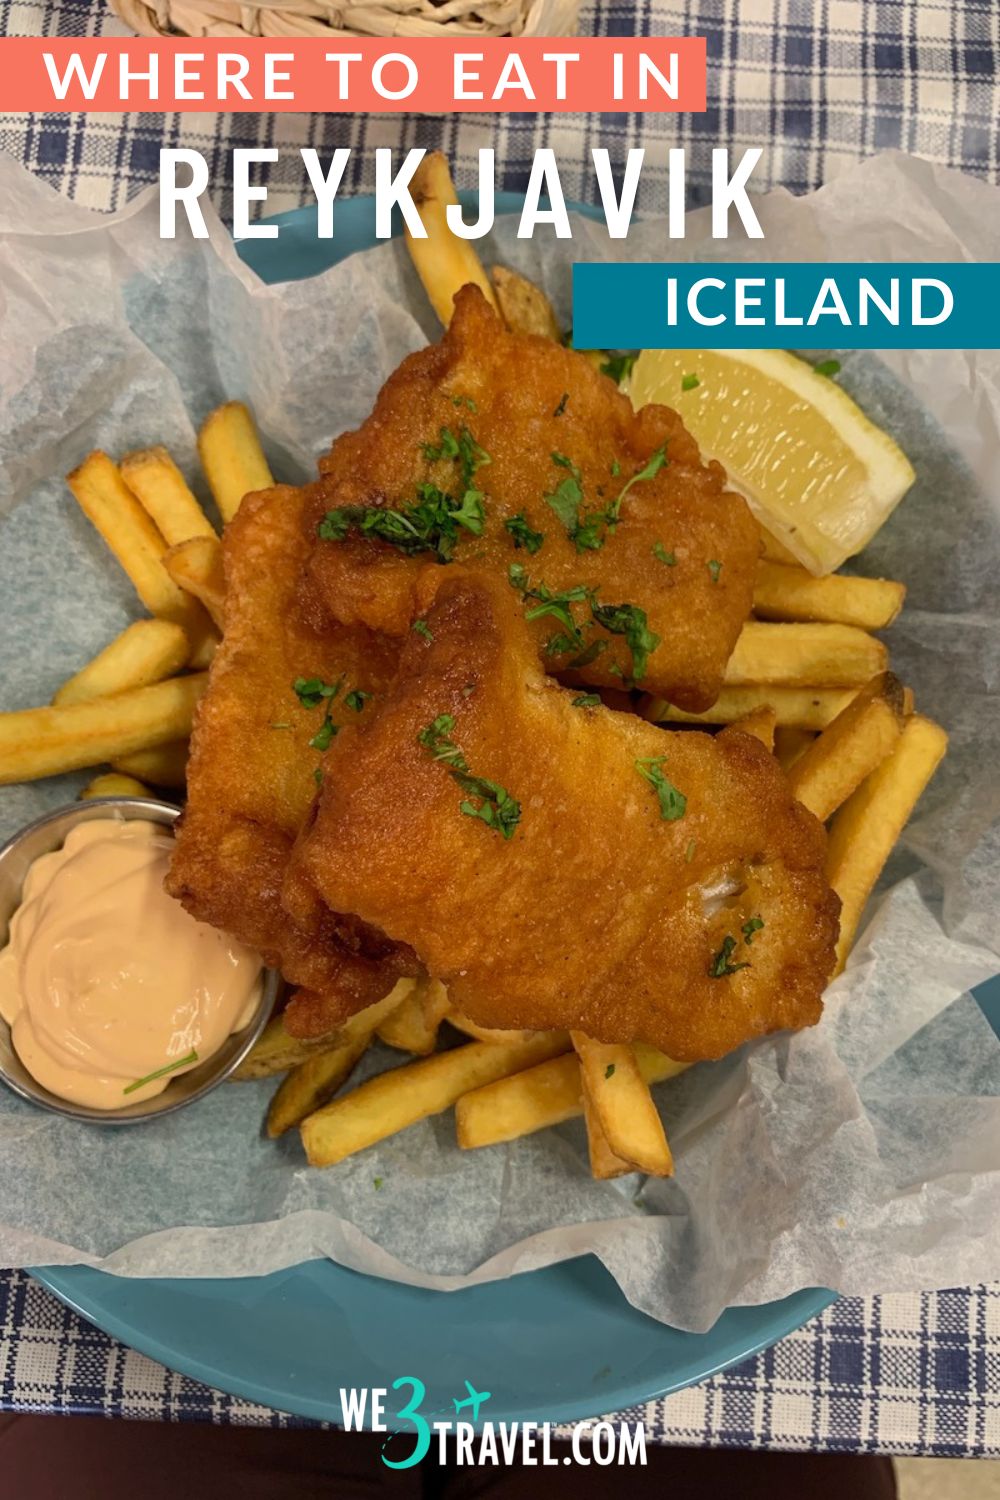 Where to eat in Reykjavik Iceland showing fish and chips in a basket